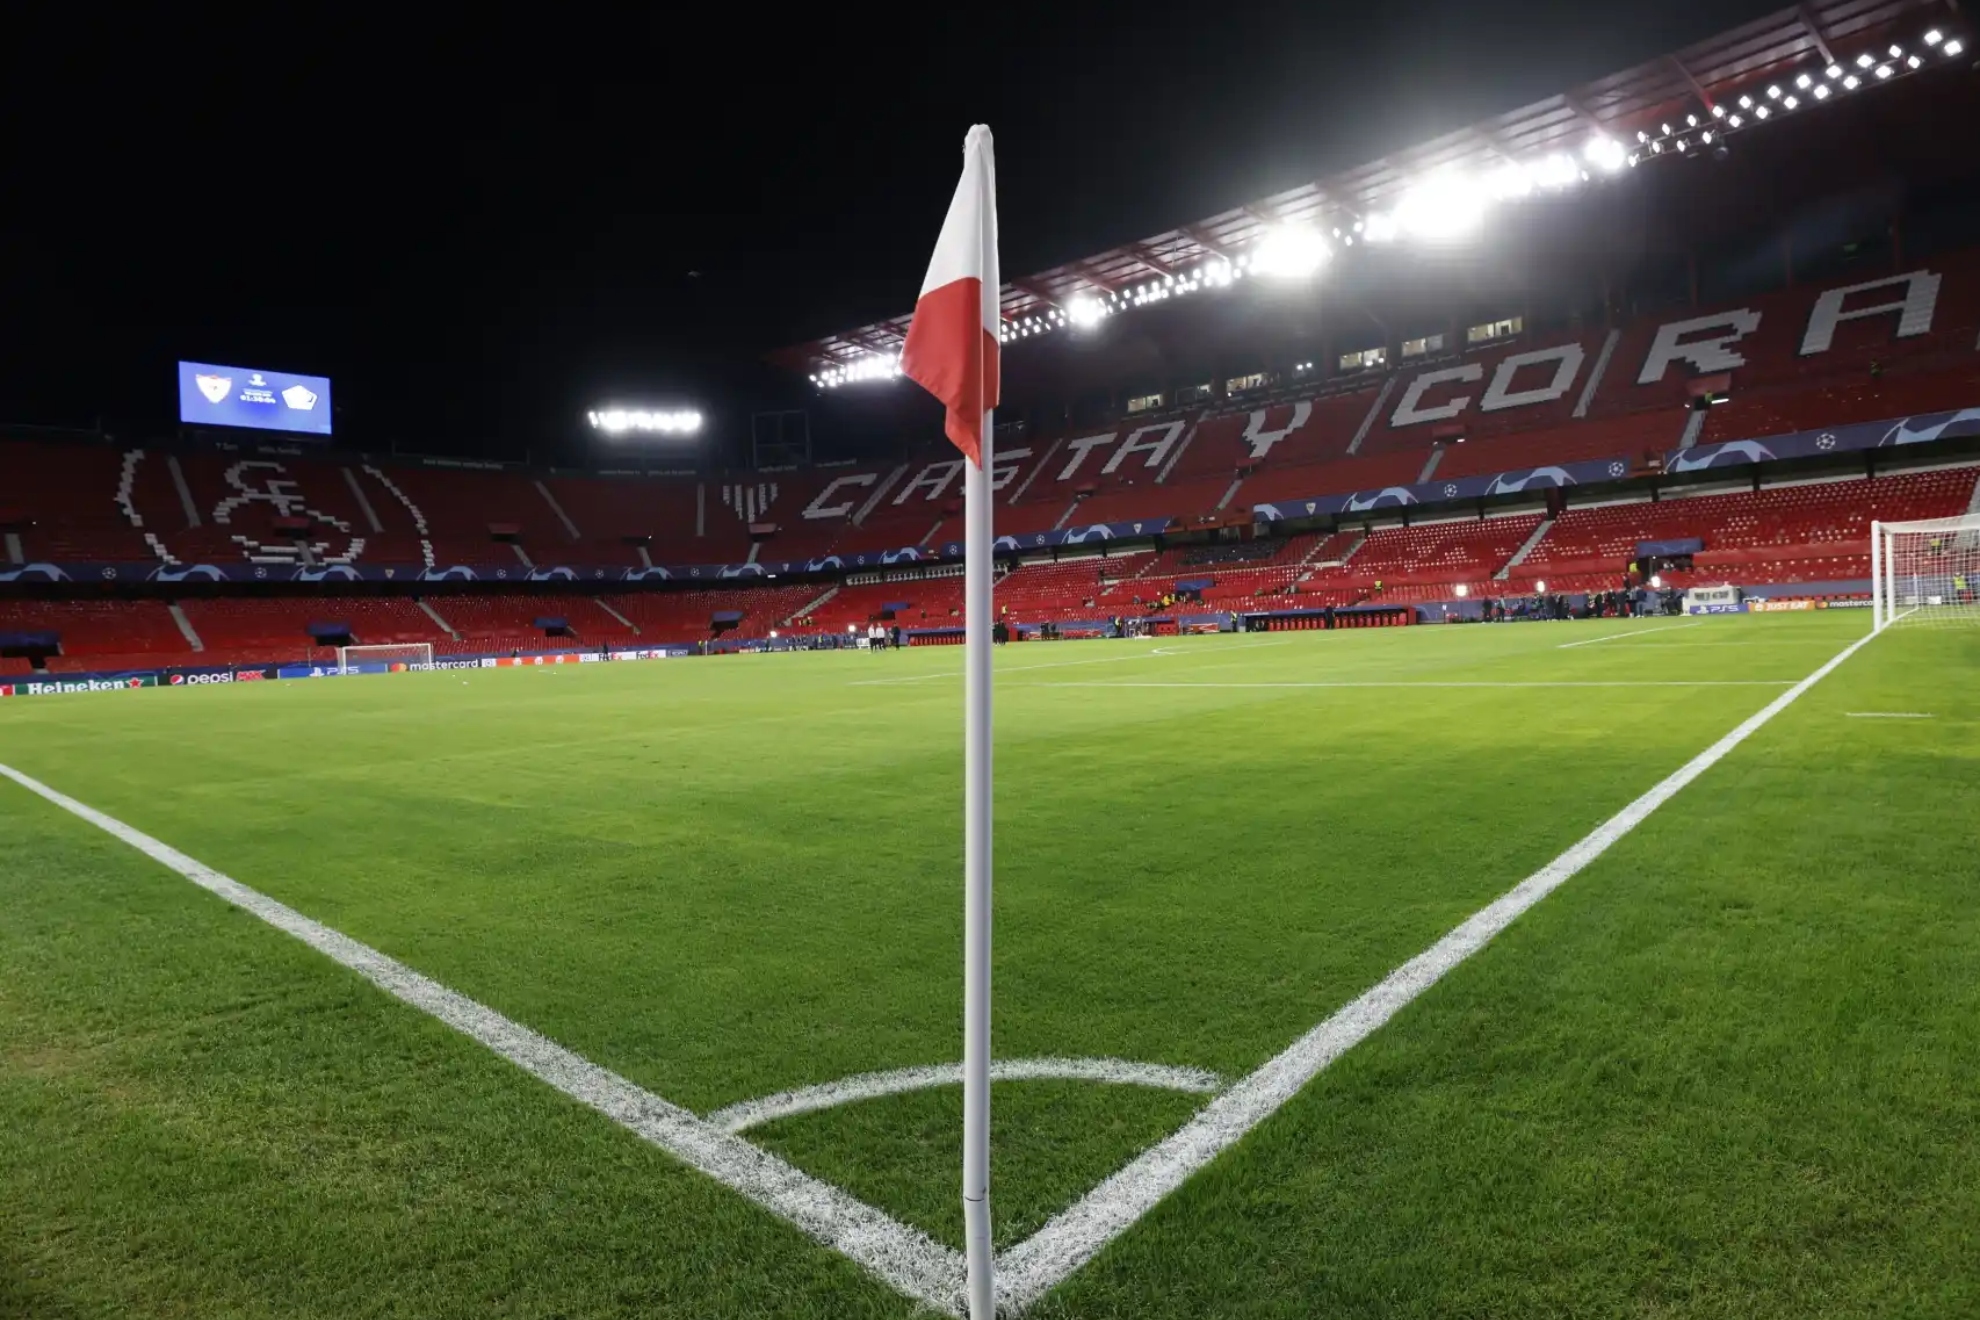 Sevilla Fan Token holders will choose and place the new corner flags at the Pizjuan.